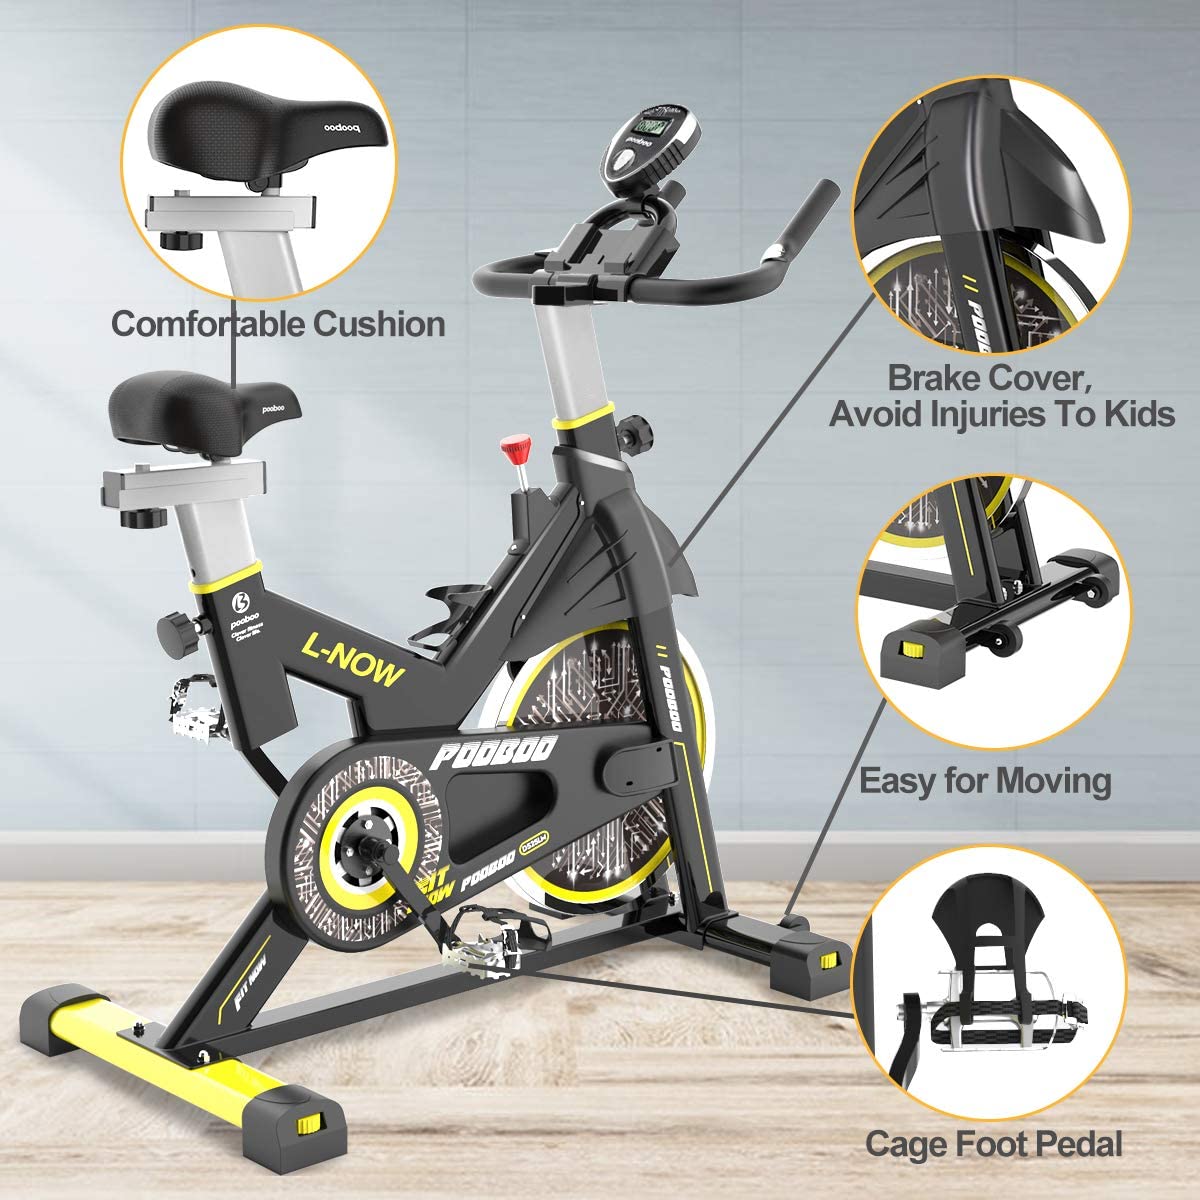 Pooboo Indoor Cycling Bike - Review of Model D525